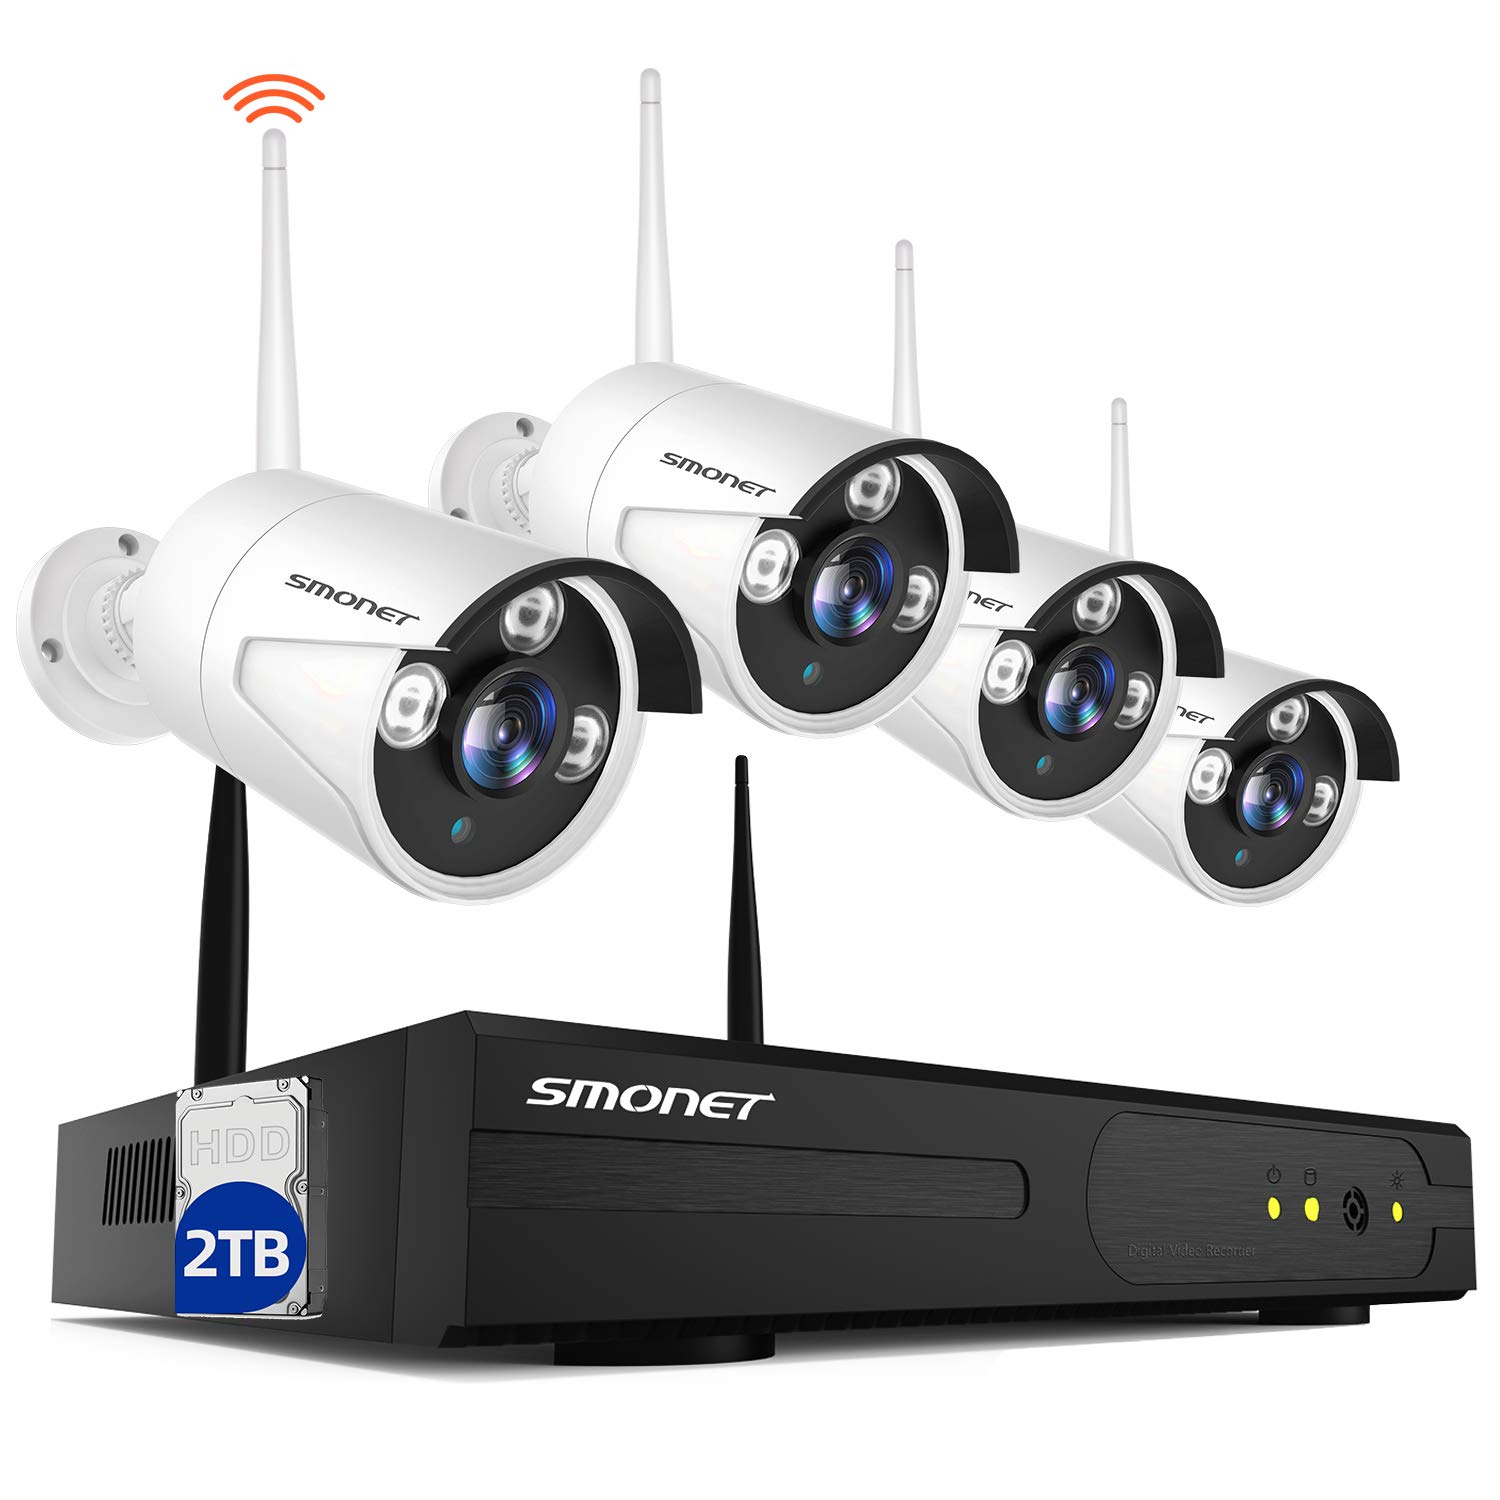 Book Cover Wireless Security Camera System,SMONET 8-Channel 1080P Home Security Camera System(2TB Hard Drive),4pcs 2.0MP Indoor/Outdoor Wireless Security Cameras,P2P,65ft Night Vision,Easy Remote View